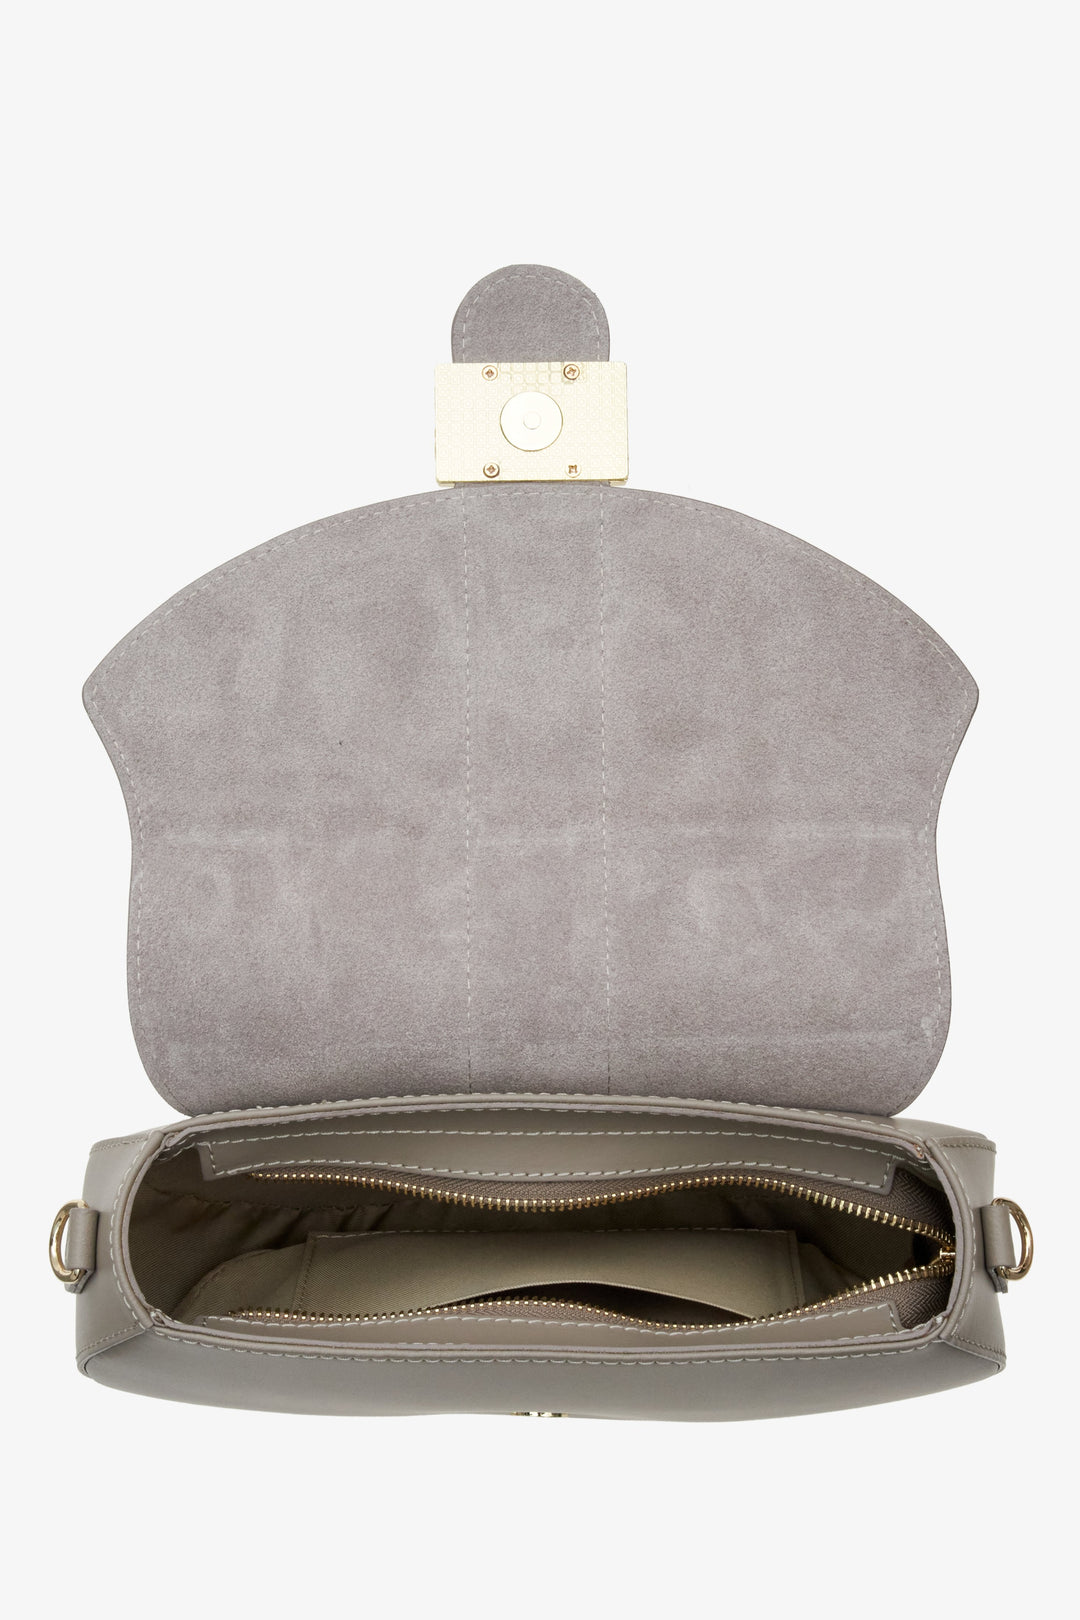 Women's grey leather handbag handmade in Italy - a close-up on bag's compartment.